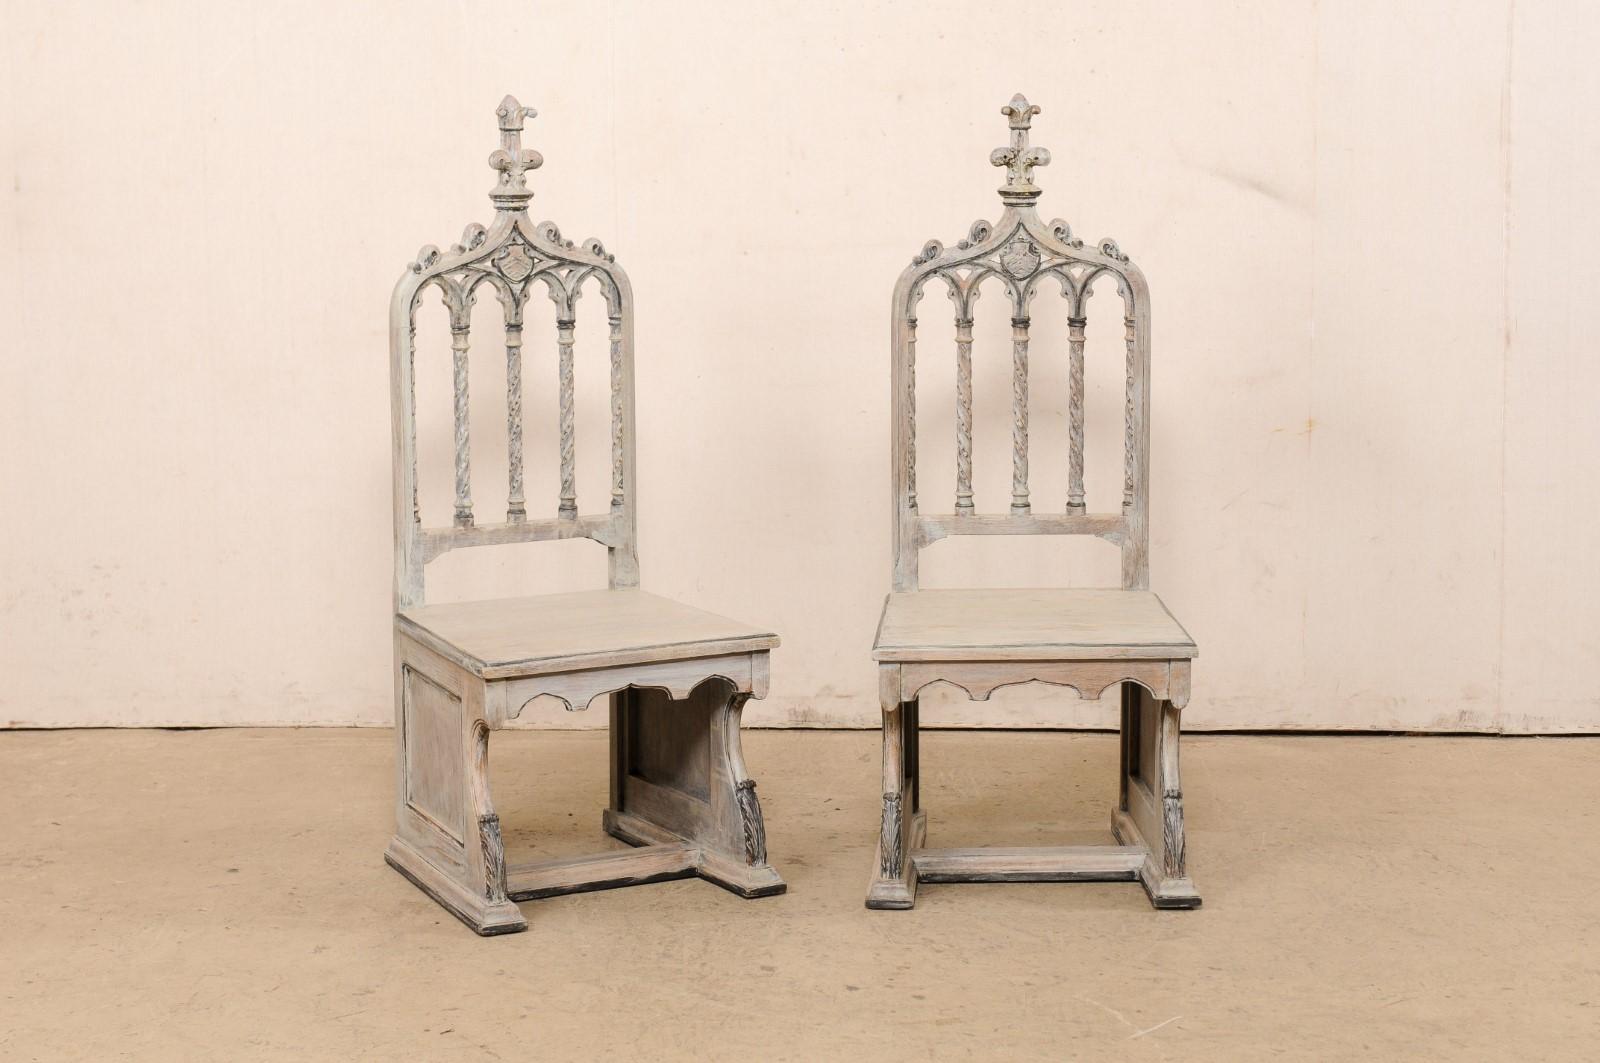 An English pair of Gothic Revival style carved and painted wood chairs, circa 1920's. This antique pair of chairs from England have been intricately carved in Gothic Revival style with classic arched back adorn with tall spire finials, and